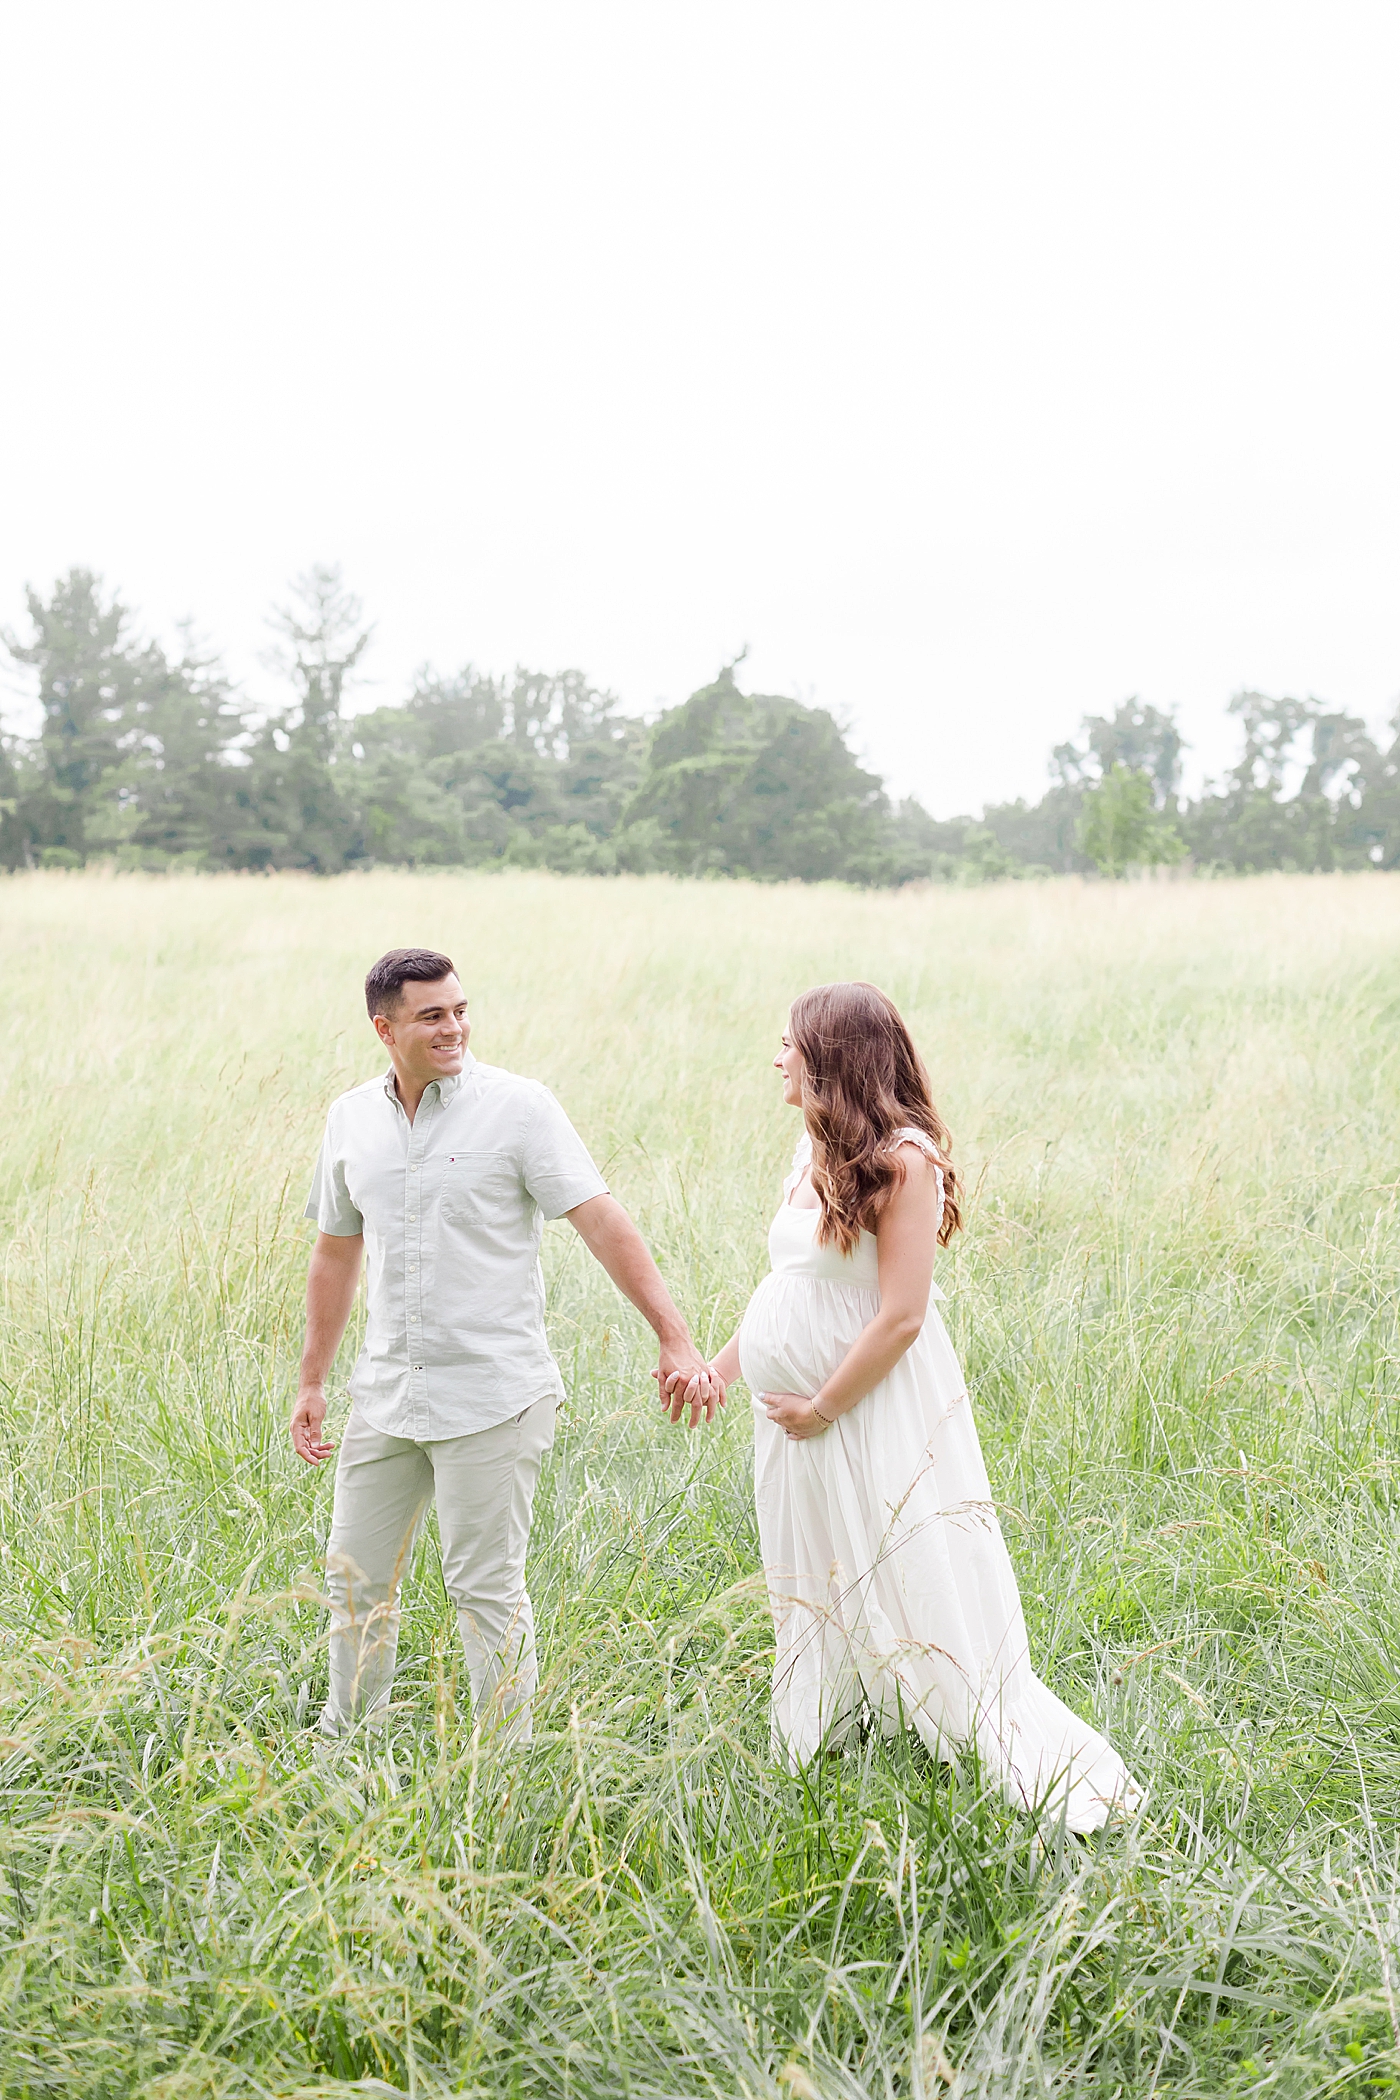 Mom and dad to be walking in a field | Image by Emily Gerald Photography